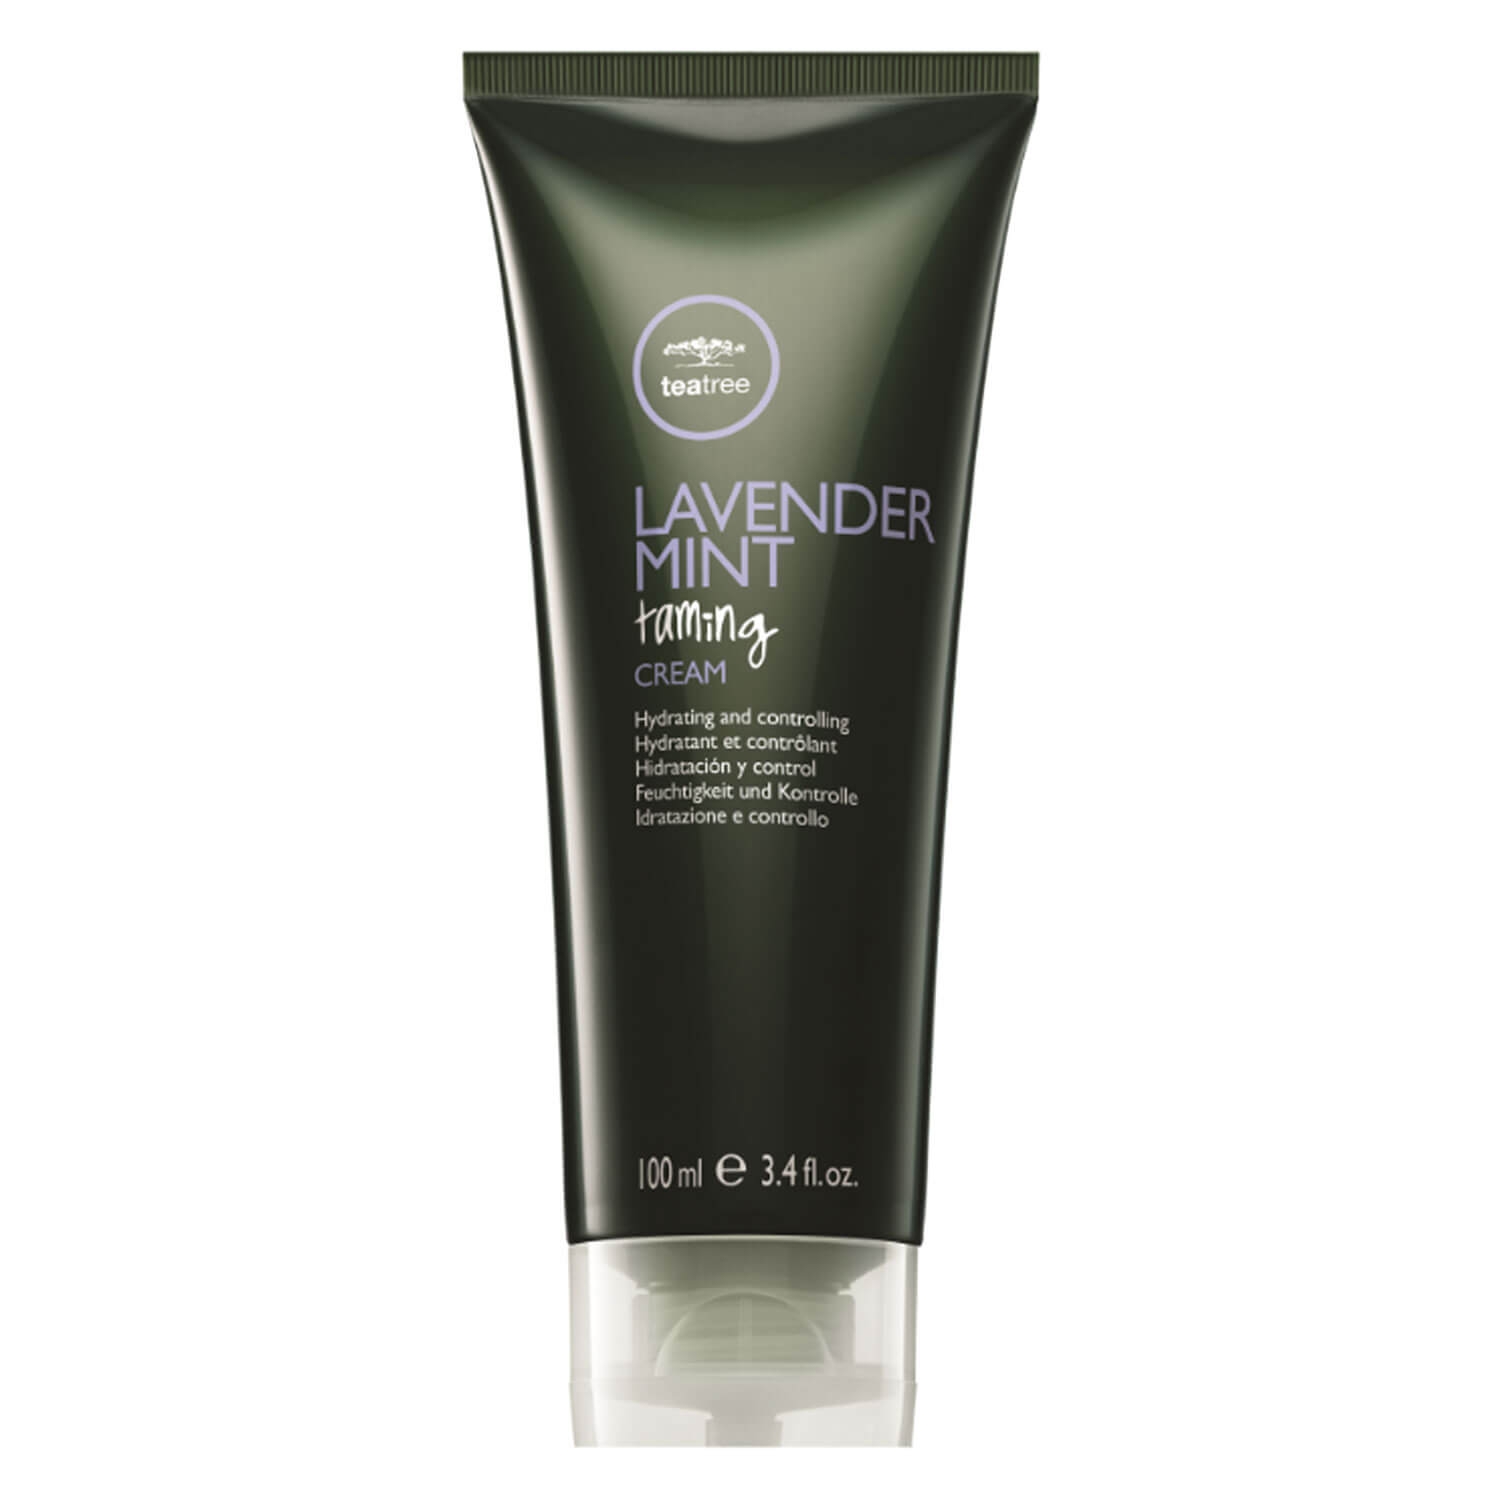 Product image from Tea Tree Lavender Mint - Taming Cream